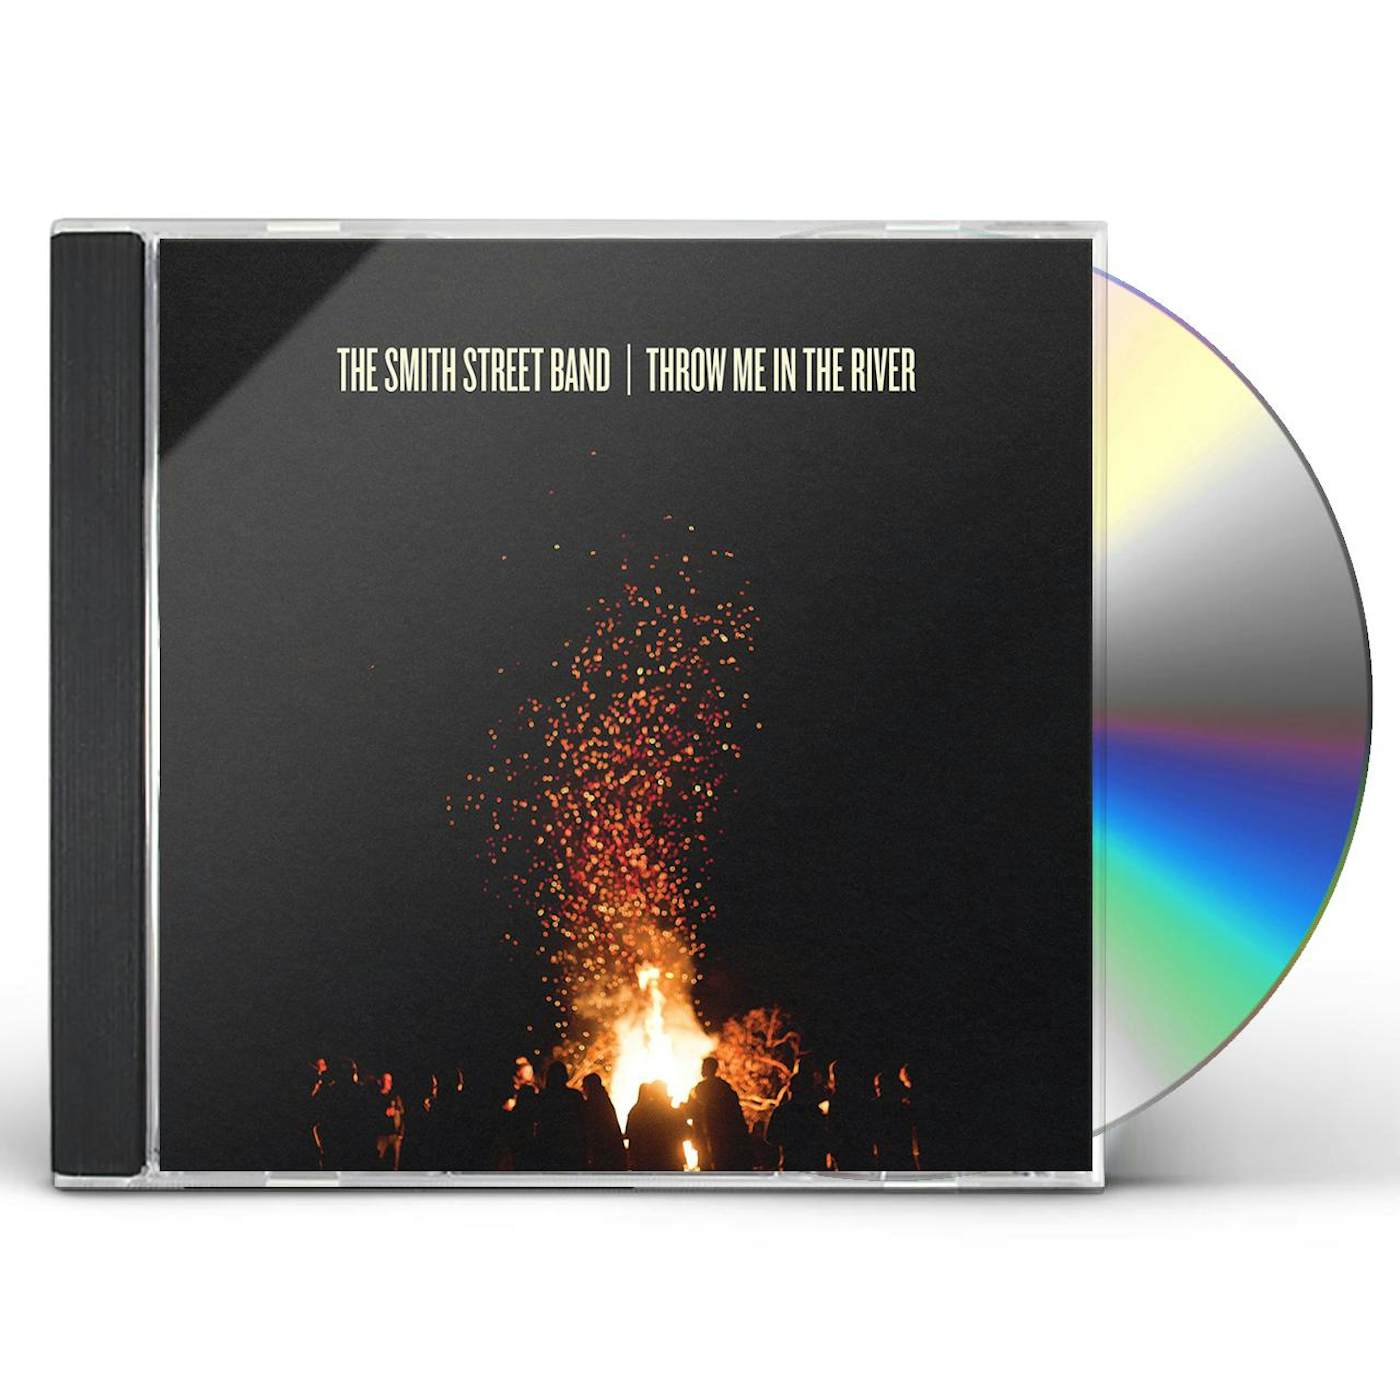 The Smith Street Band THROW ME IN THE RIVER CD